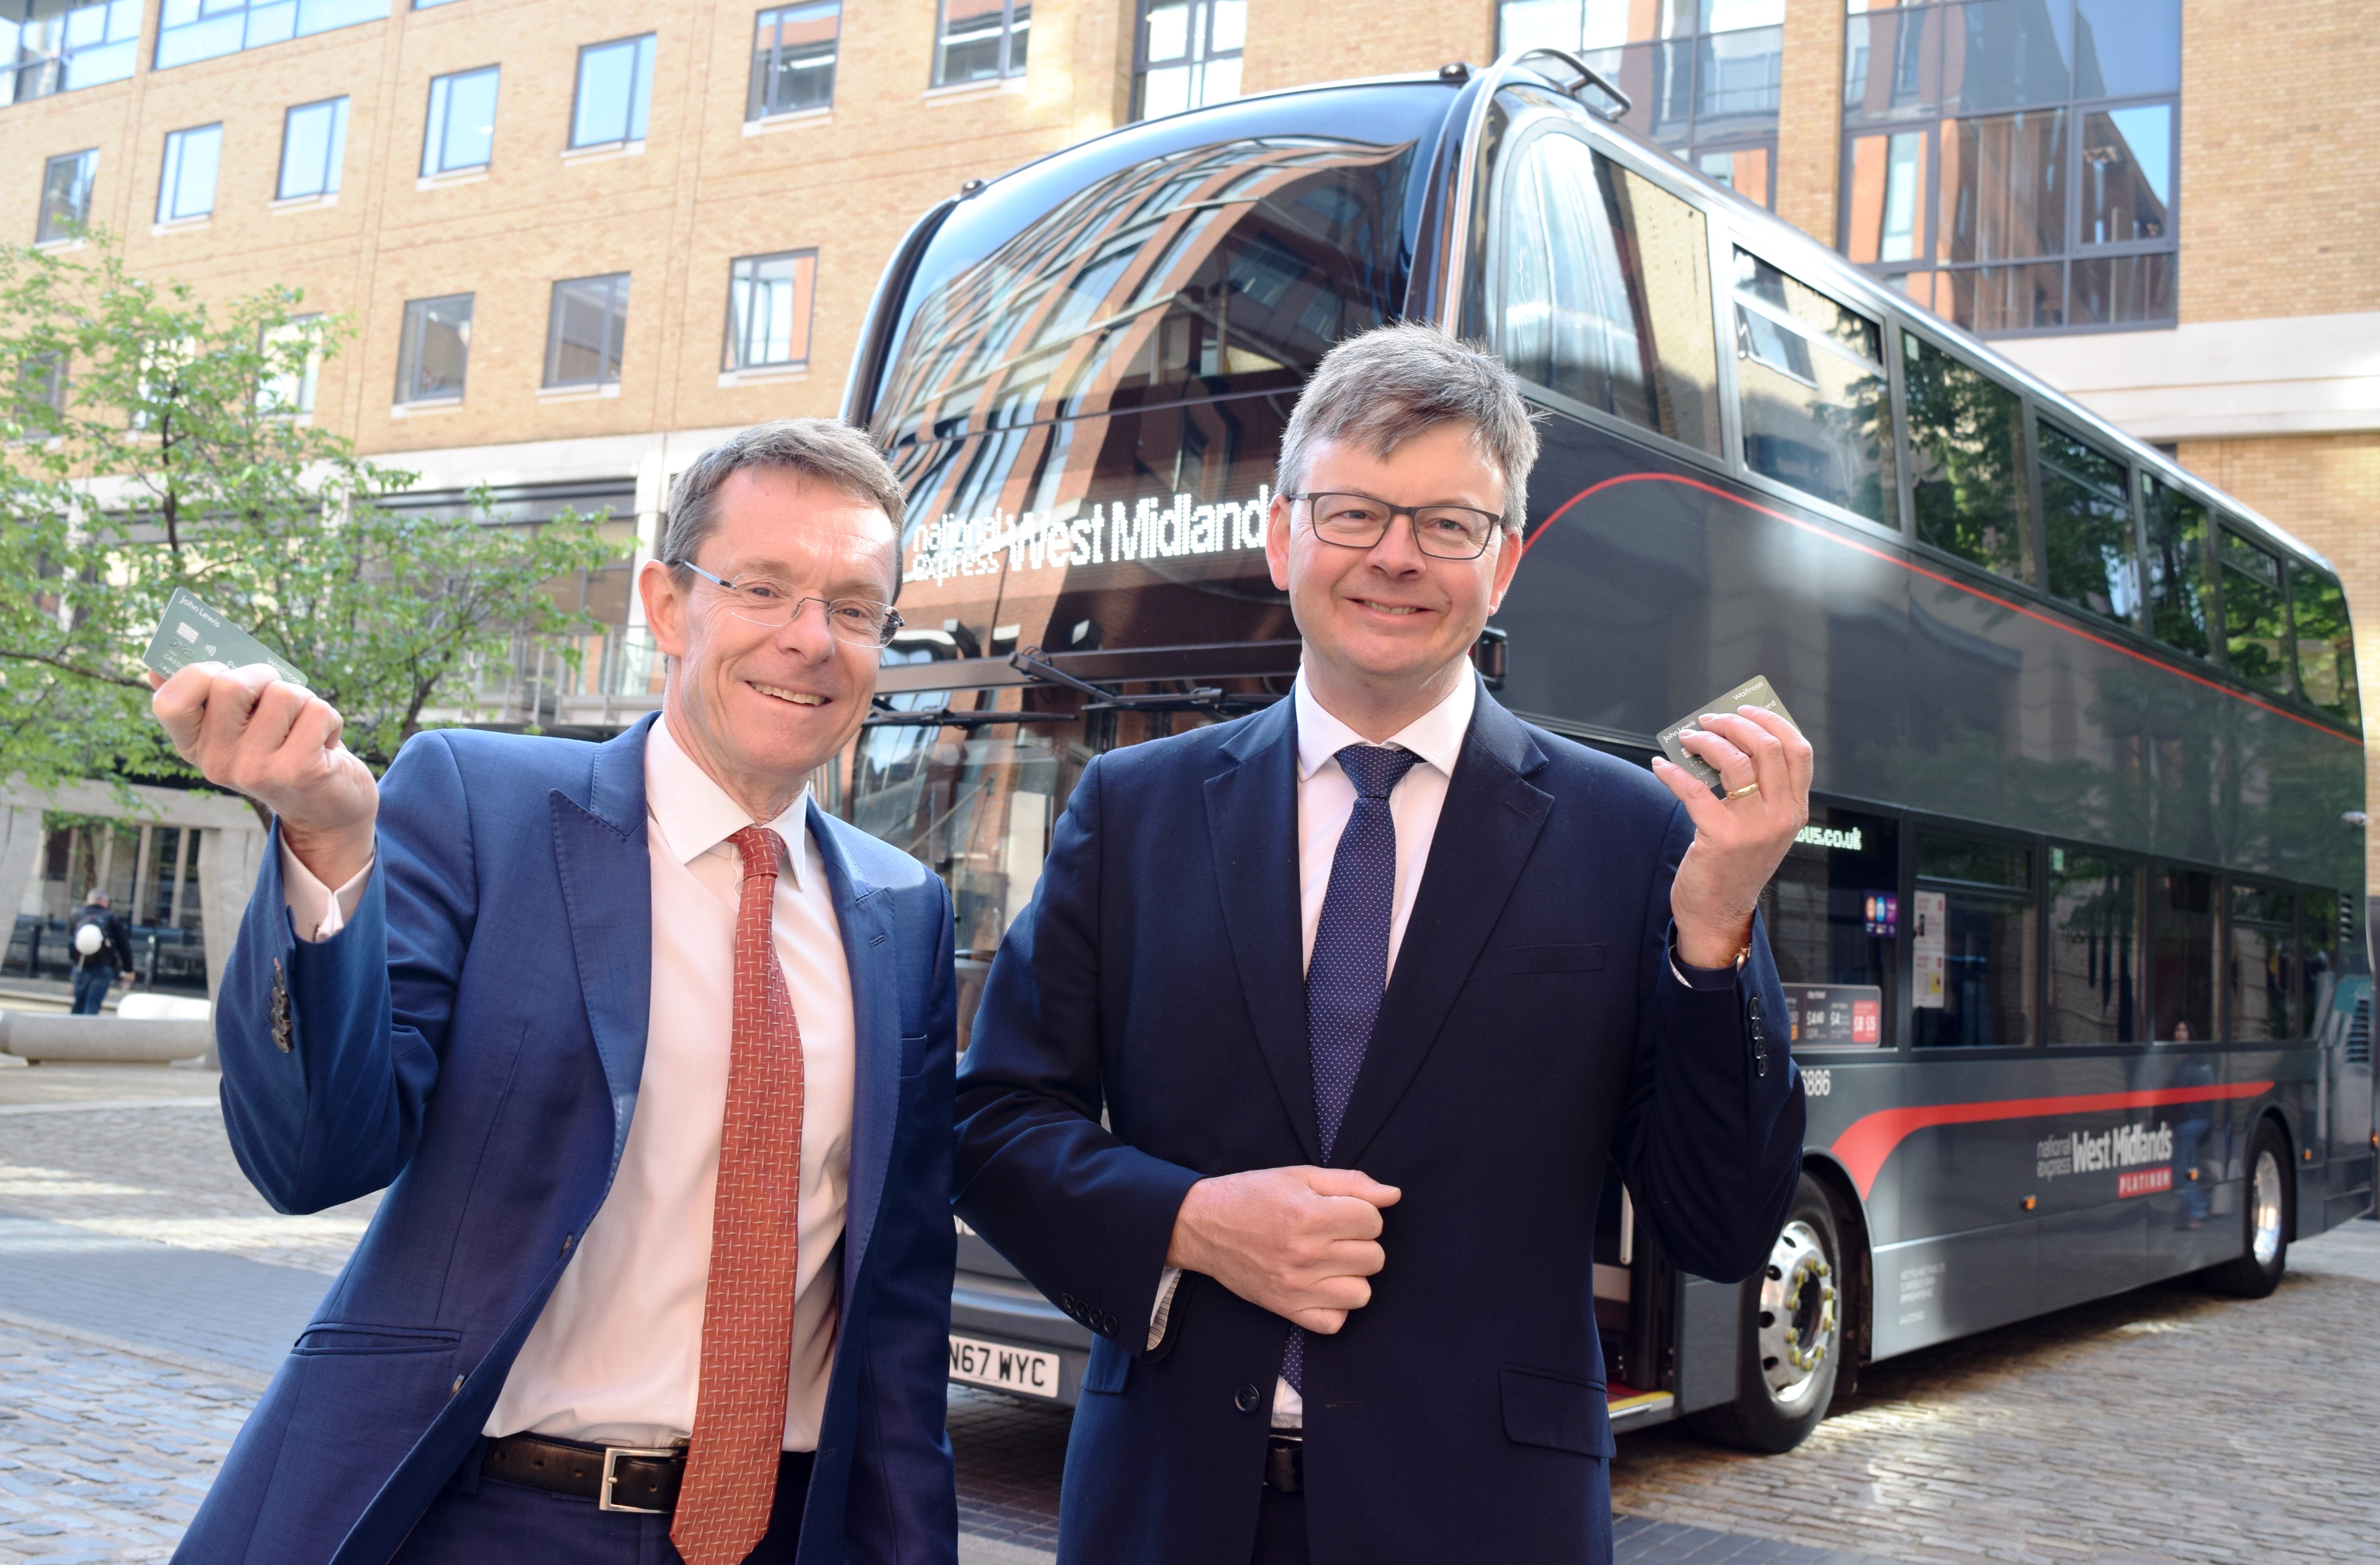 West Midlands Mayor Andy Street and National Express West Midlands MD Tom Stables.